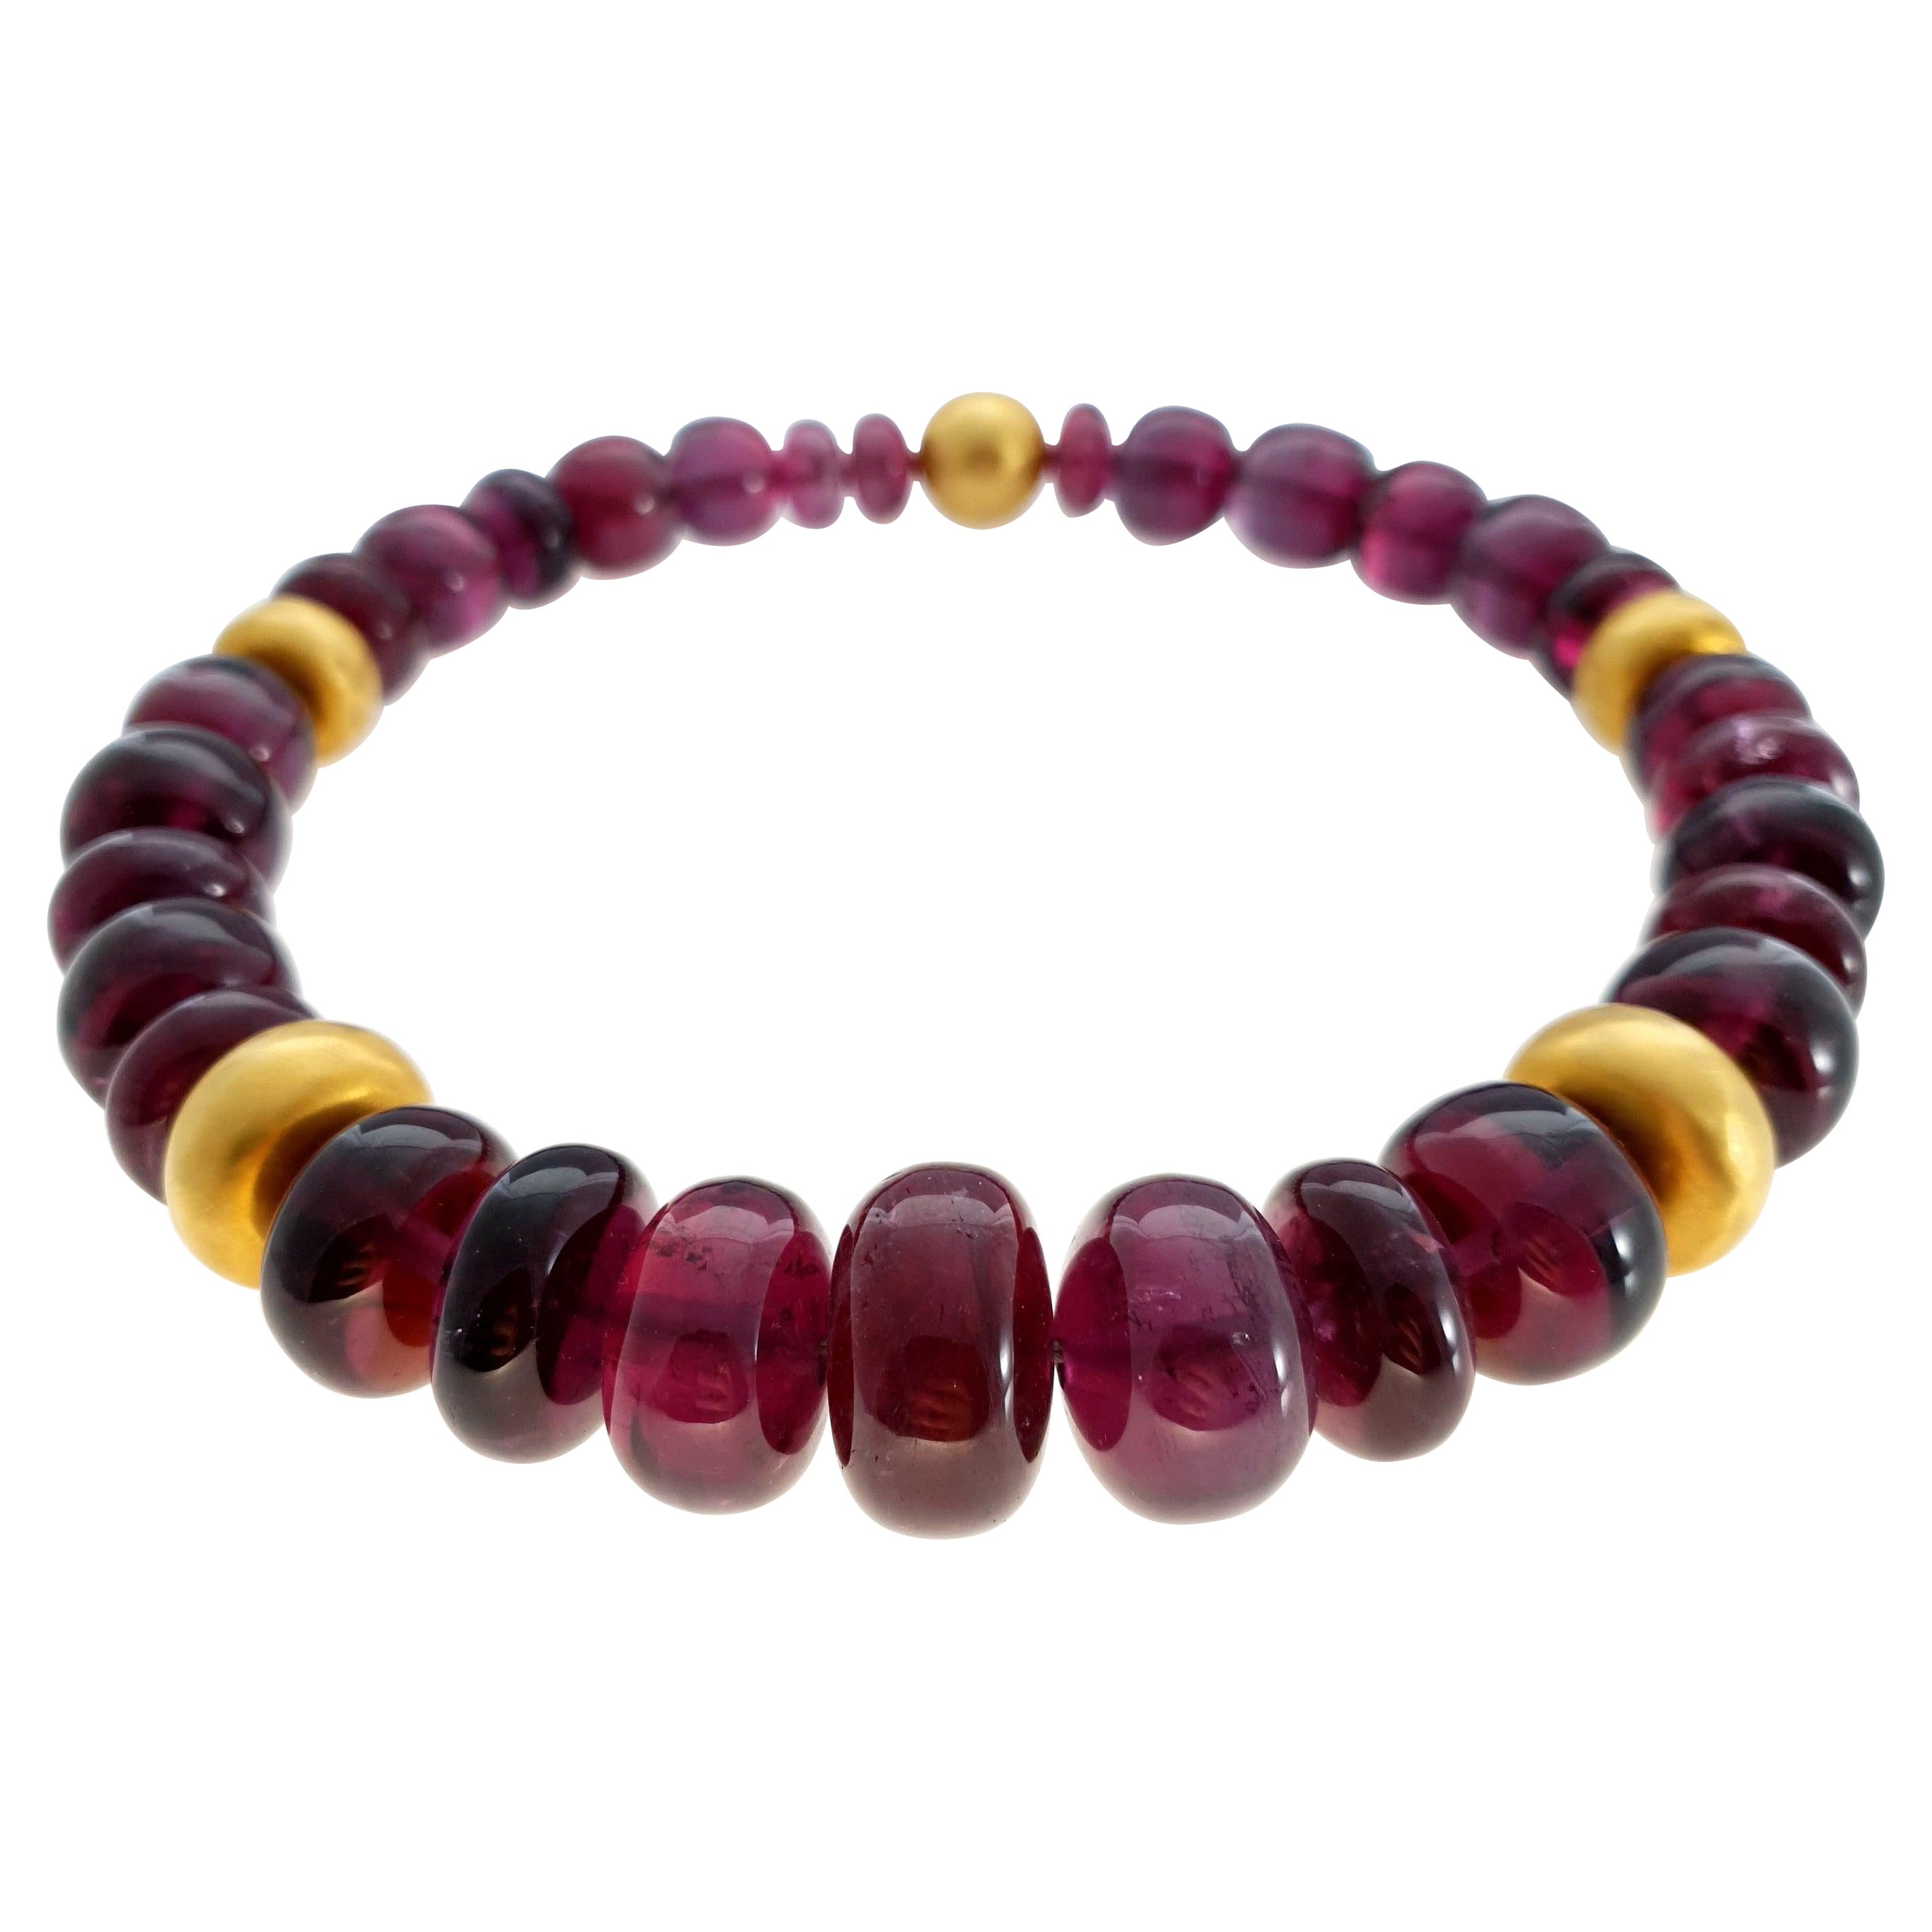 Big Purple Rubelite Tourmaline Rondel Beaded Necklace with 18 Carat Yellow Gold For Sale